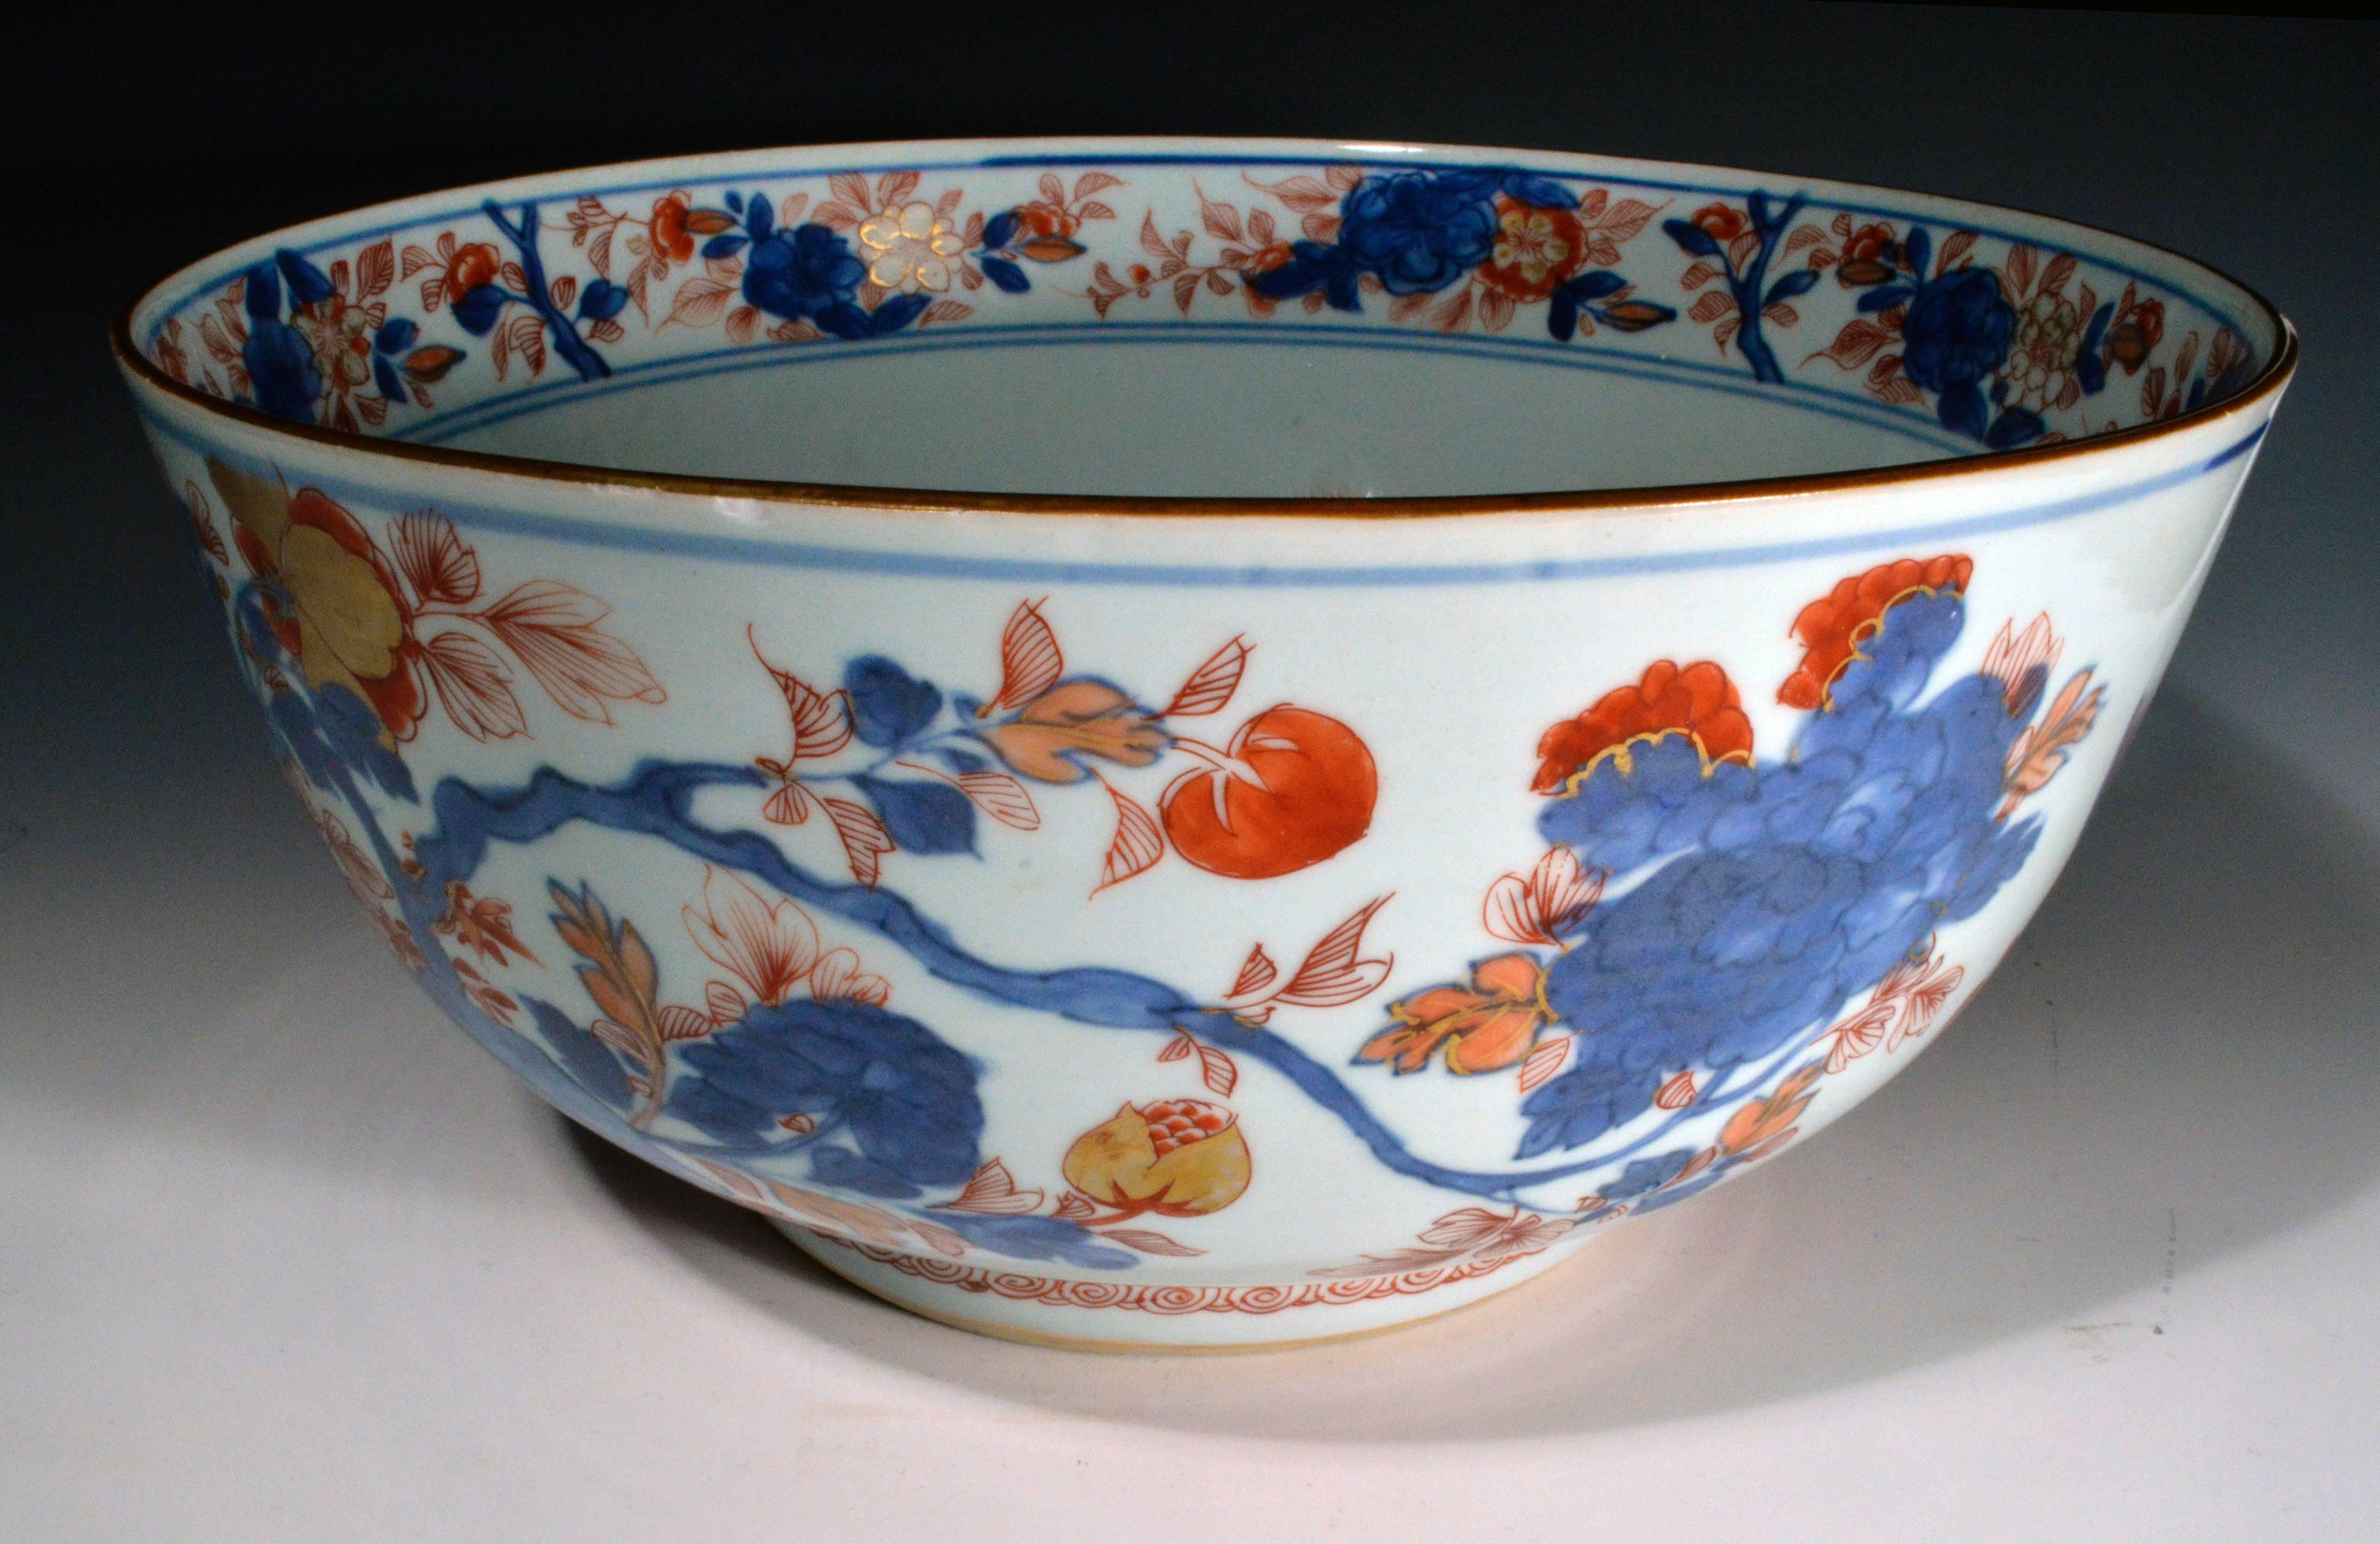 Chinese Export Porcelain high-sided bowl is decorated in Imari colours of iron red and underglaze blue with gilt highlights with birds amongst flowering plants and blue rockwork.

Provenance: Old Shreve, Crump & Low blue paper label.